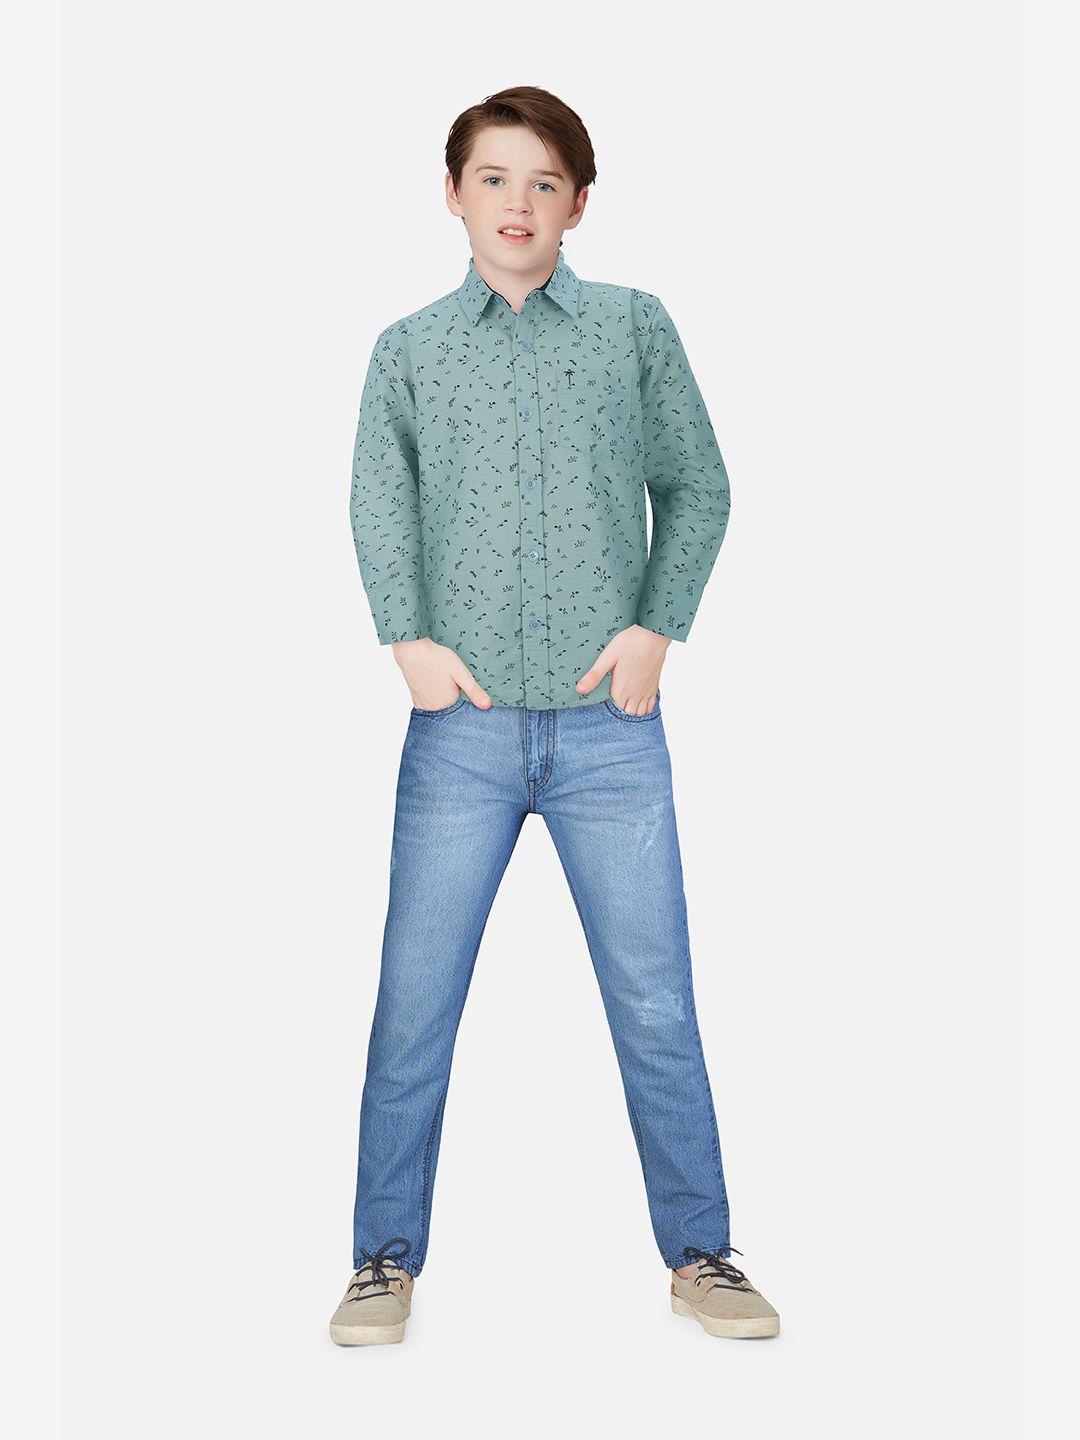 palm-tree-boys-floral-micro-ditsy-printed-long-sleeve-cotton-casual-shirt